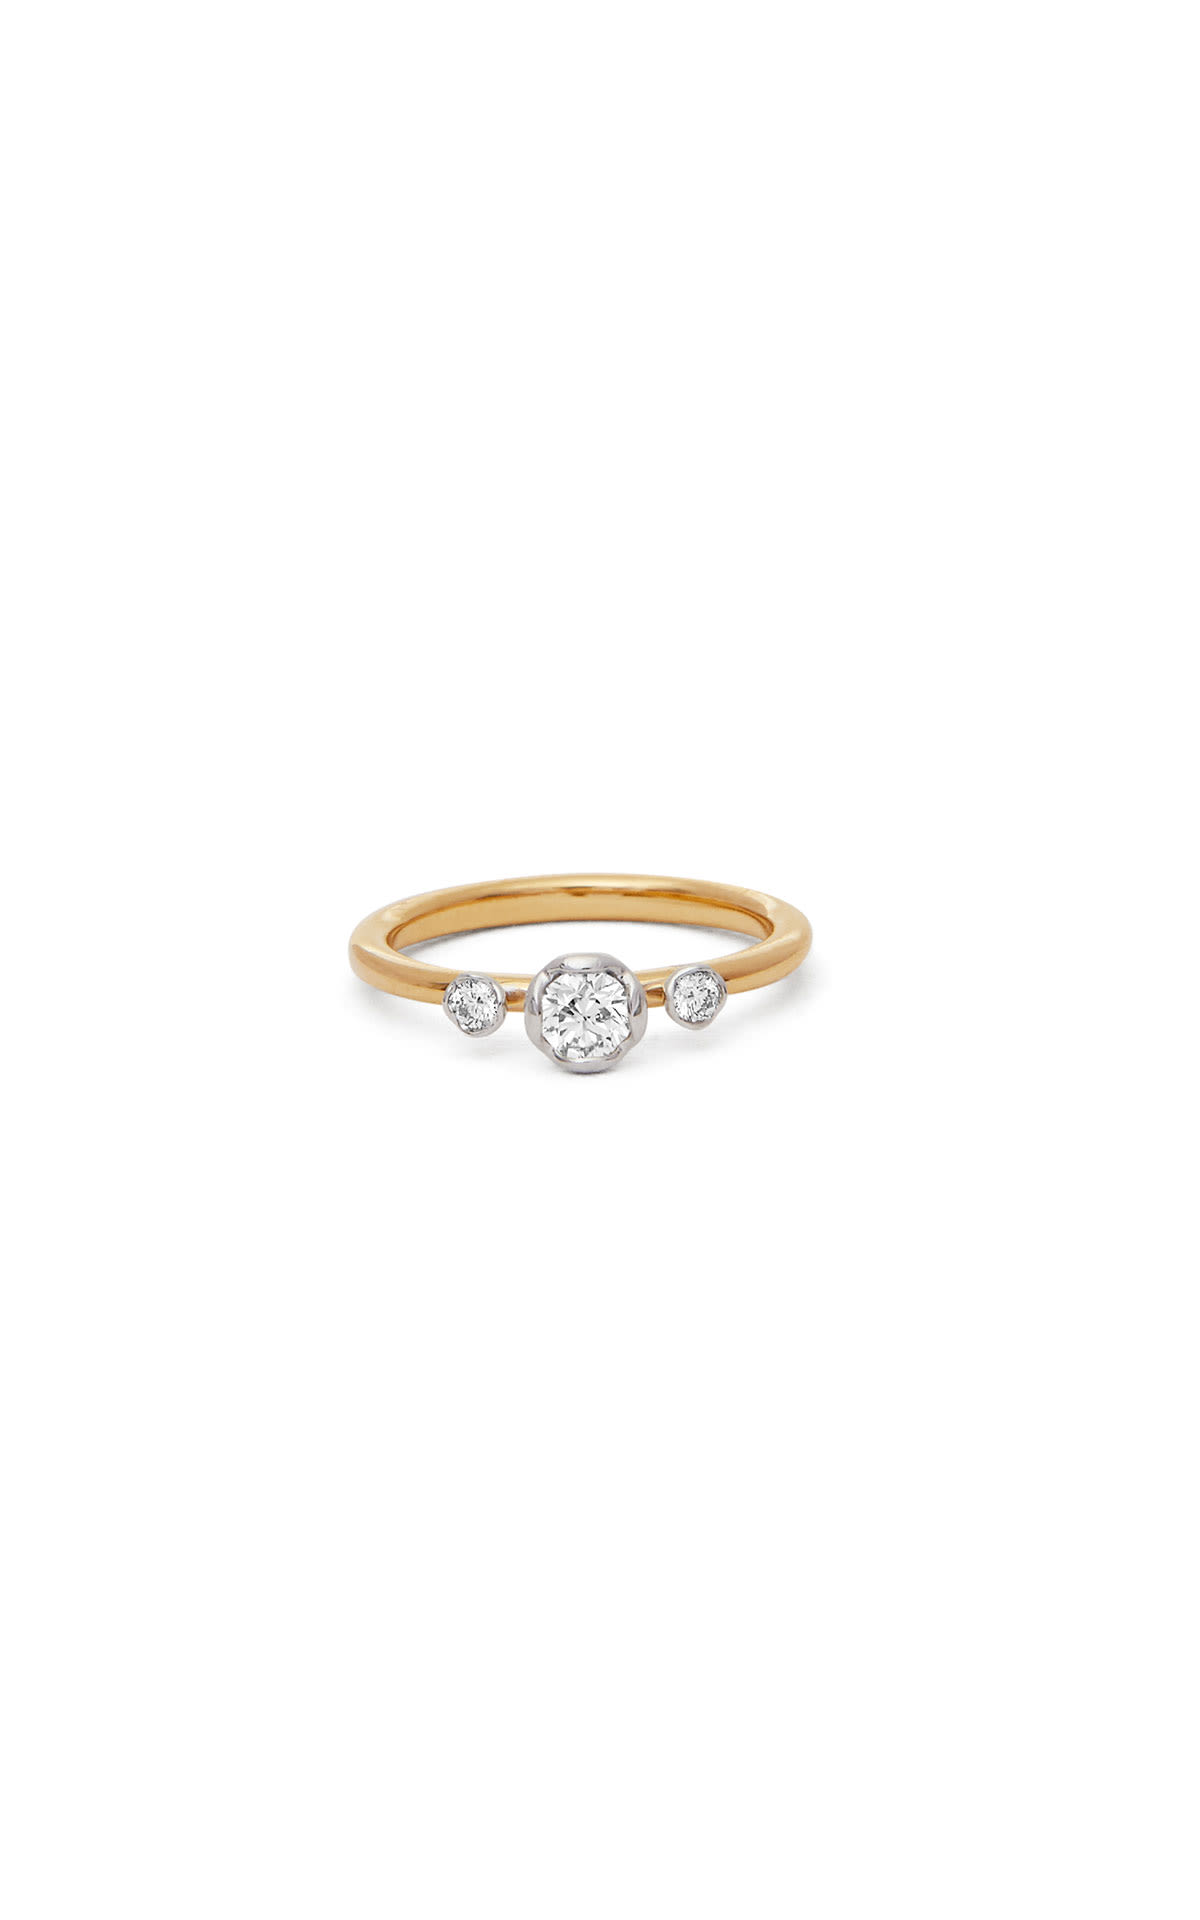 Annoushka Maguerite 18ct yellow gold three stone ring from Bicester Village